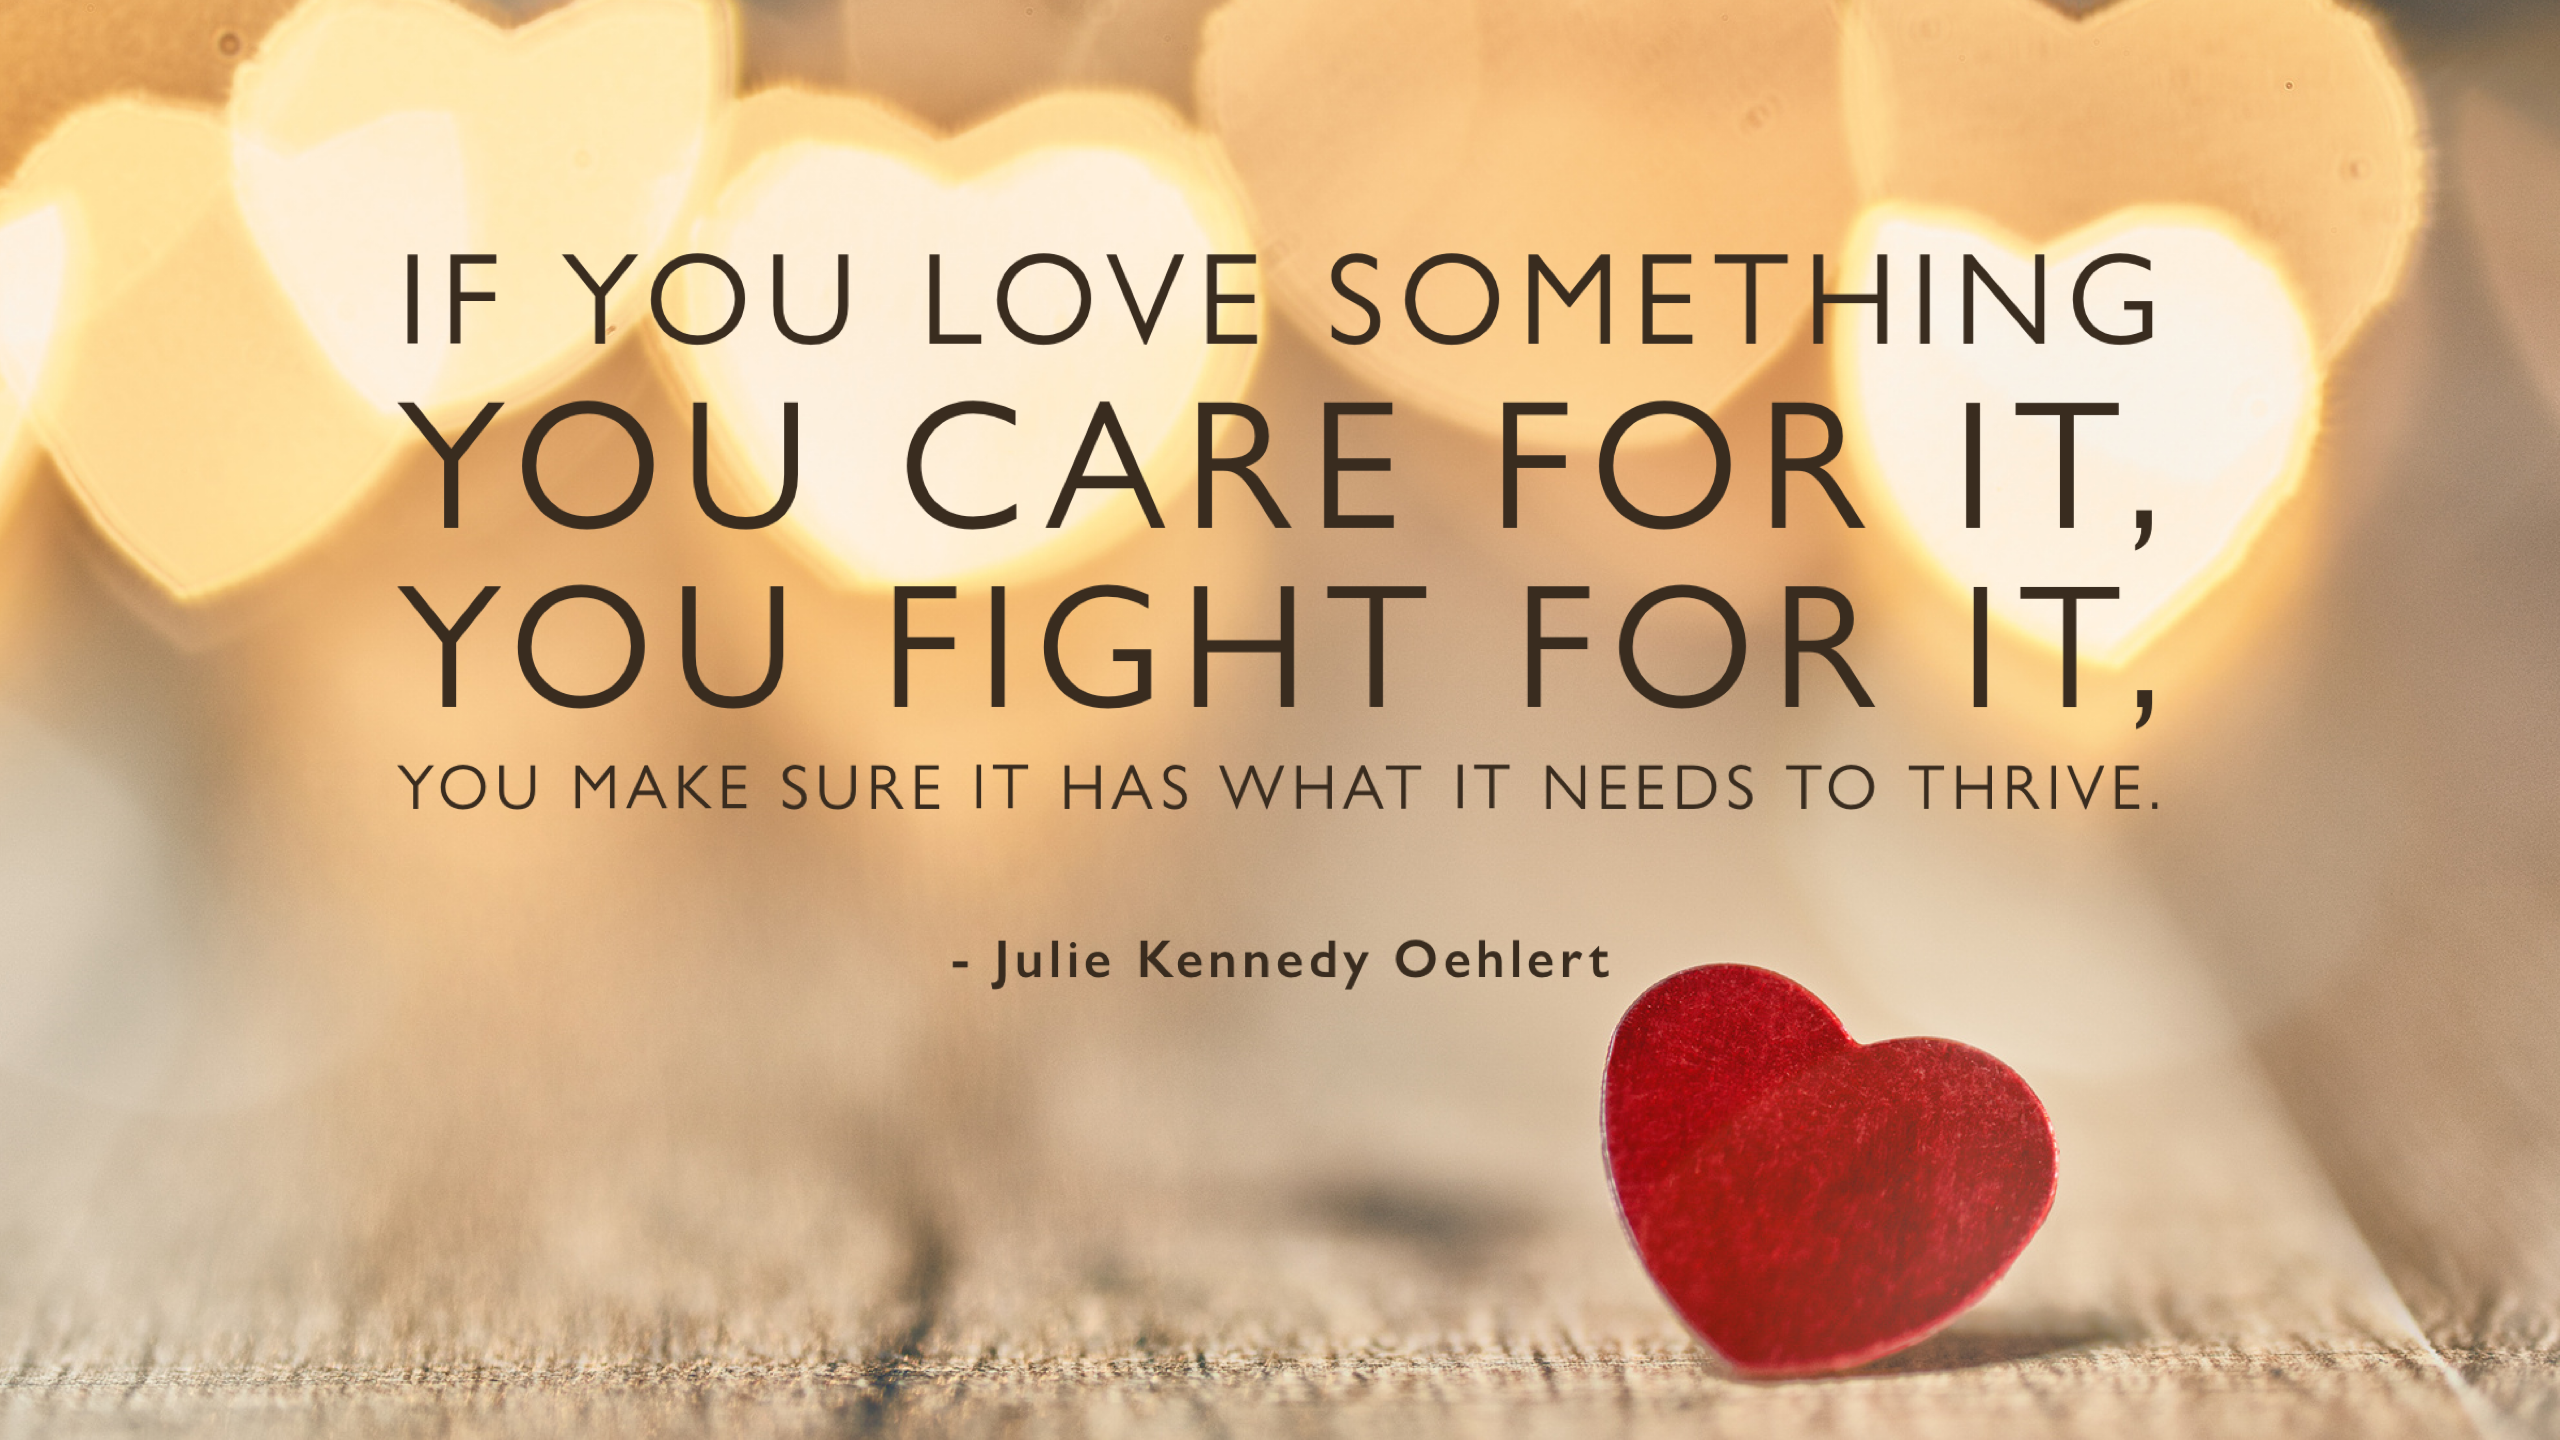 Quote by Julie Kennedy Oehlert, for TCNtalks